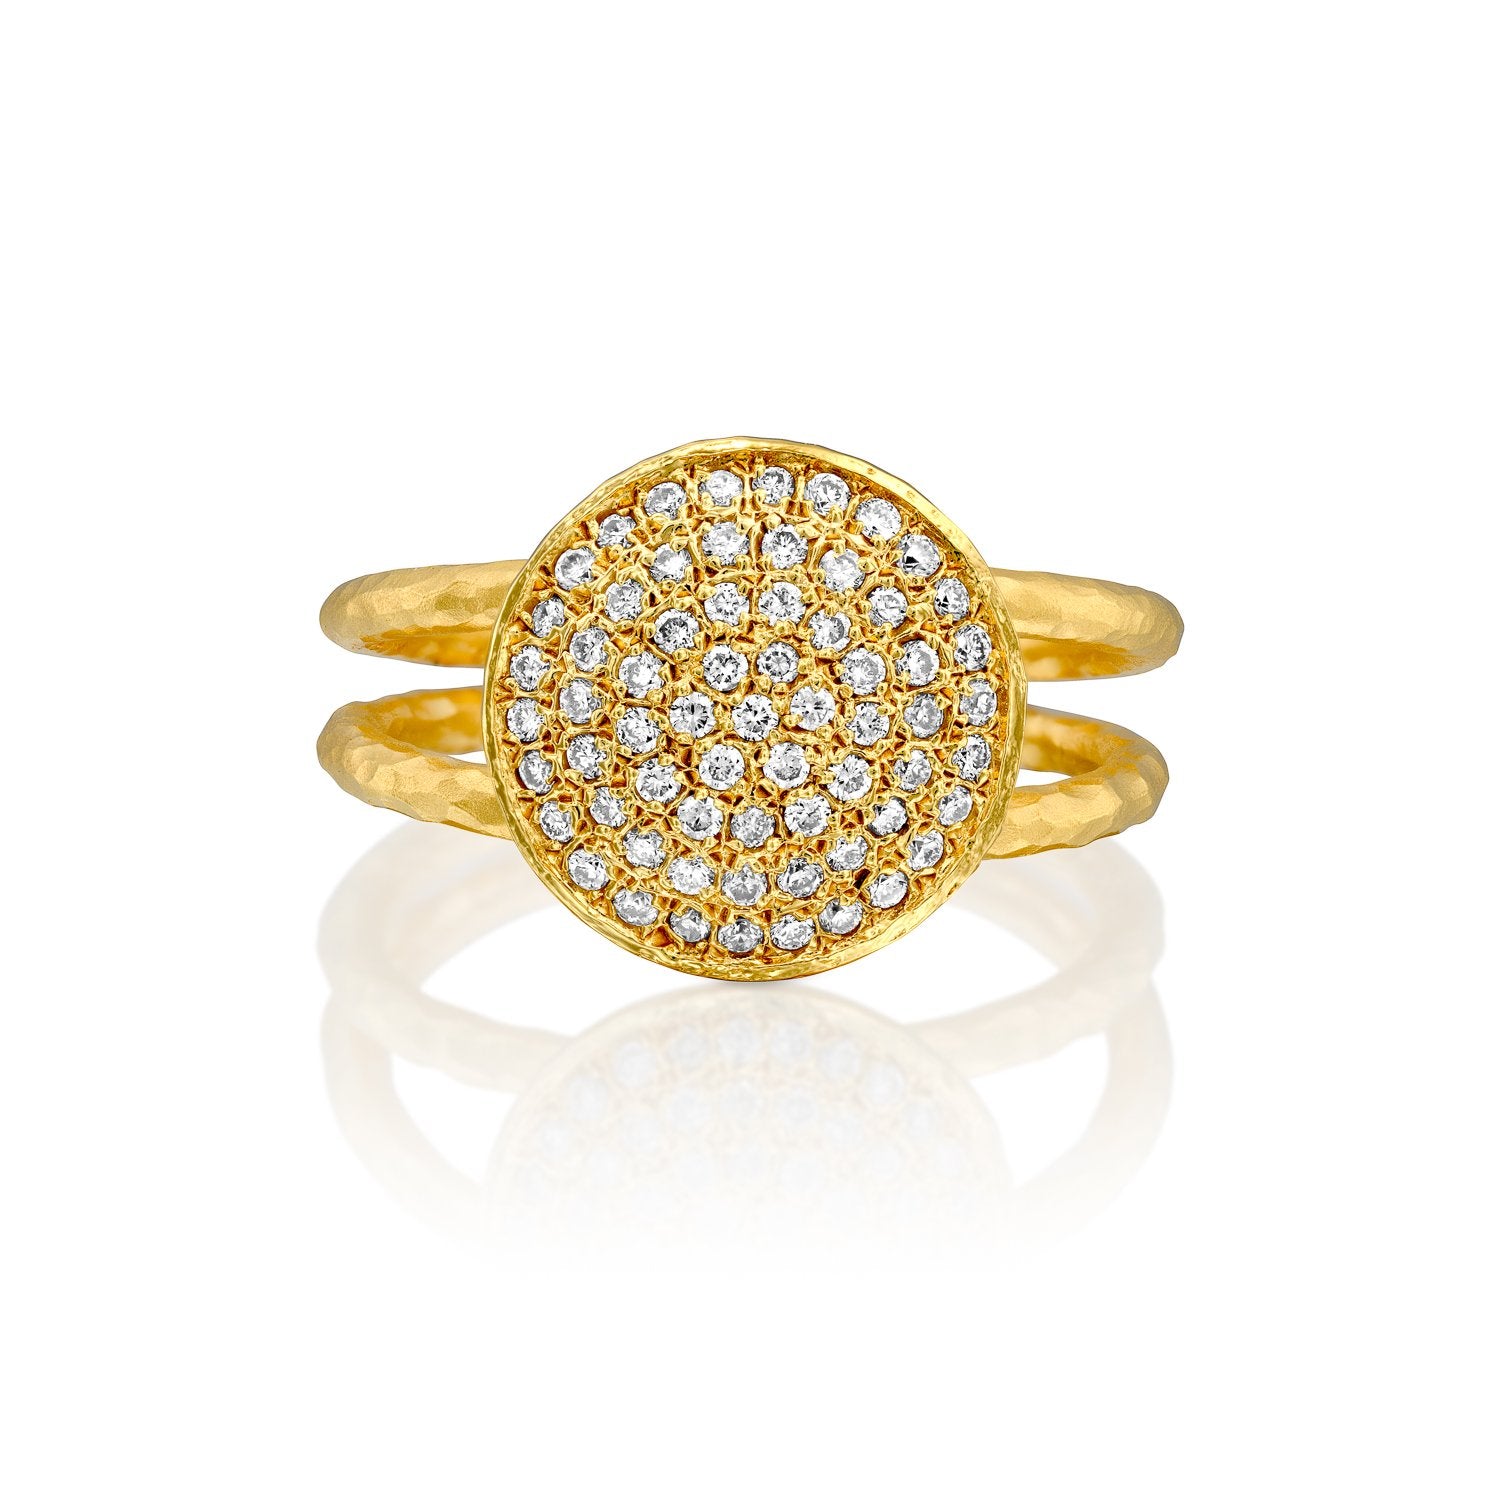 5796 - stunning .32cttw pave diamond dome ring in 14kt textured matte yellow gold.